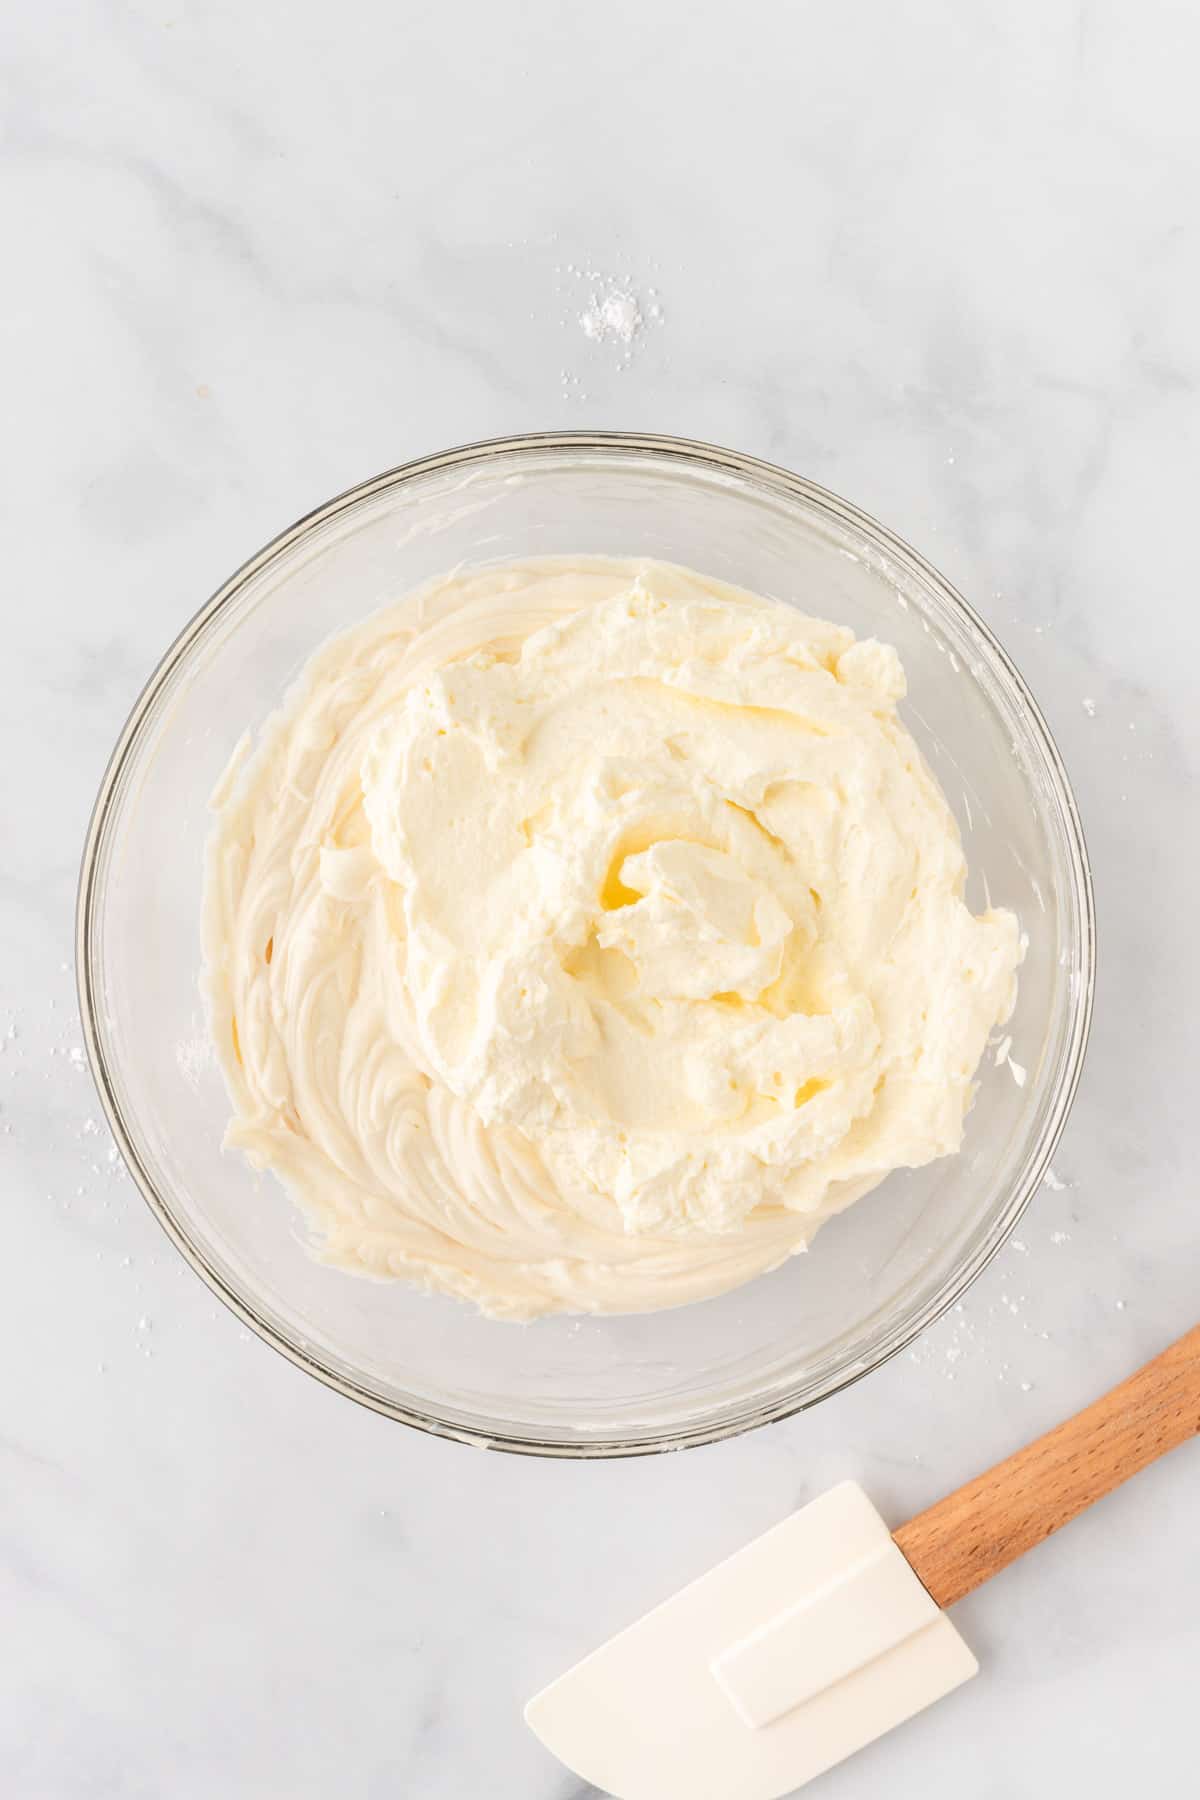 mixing the whipped cream and cream cheese together